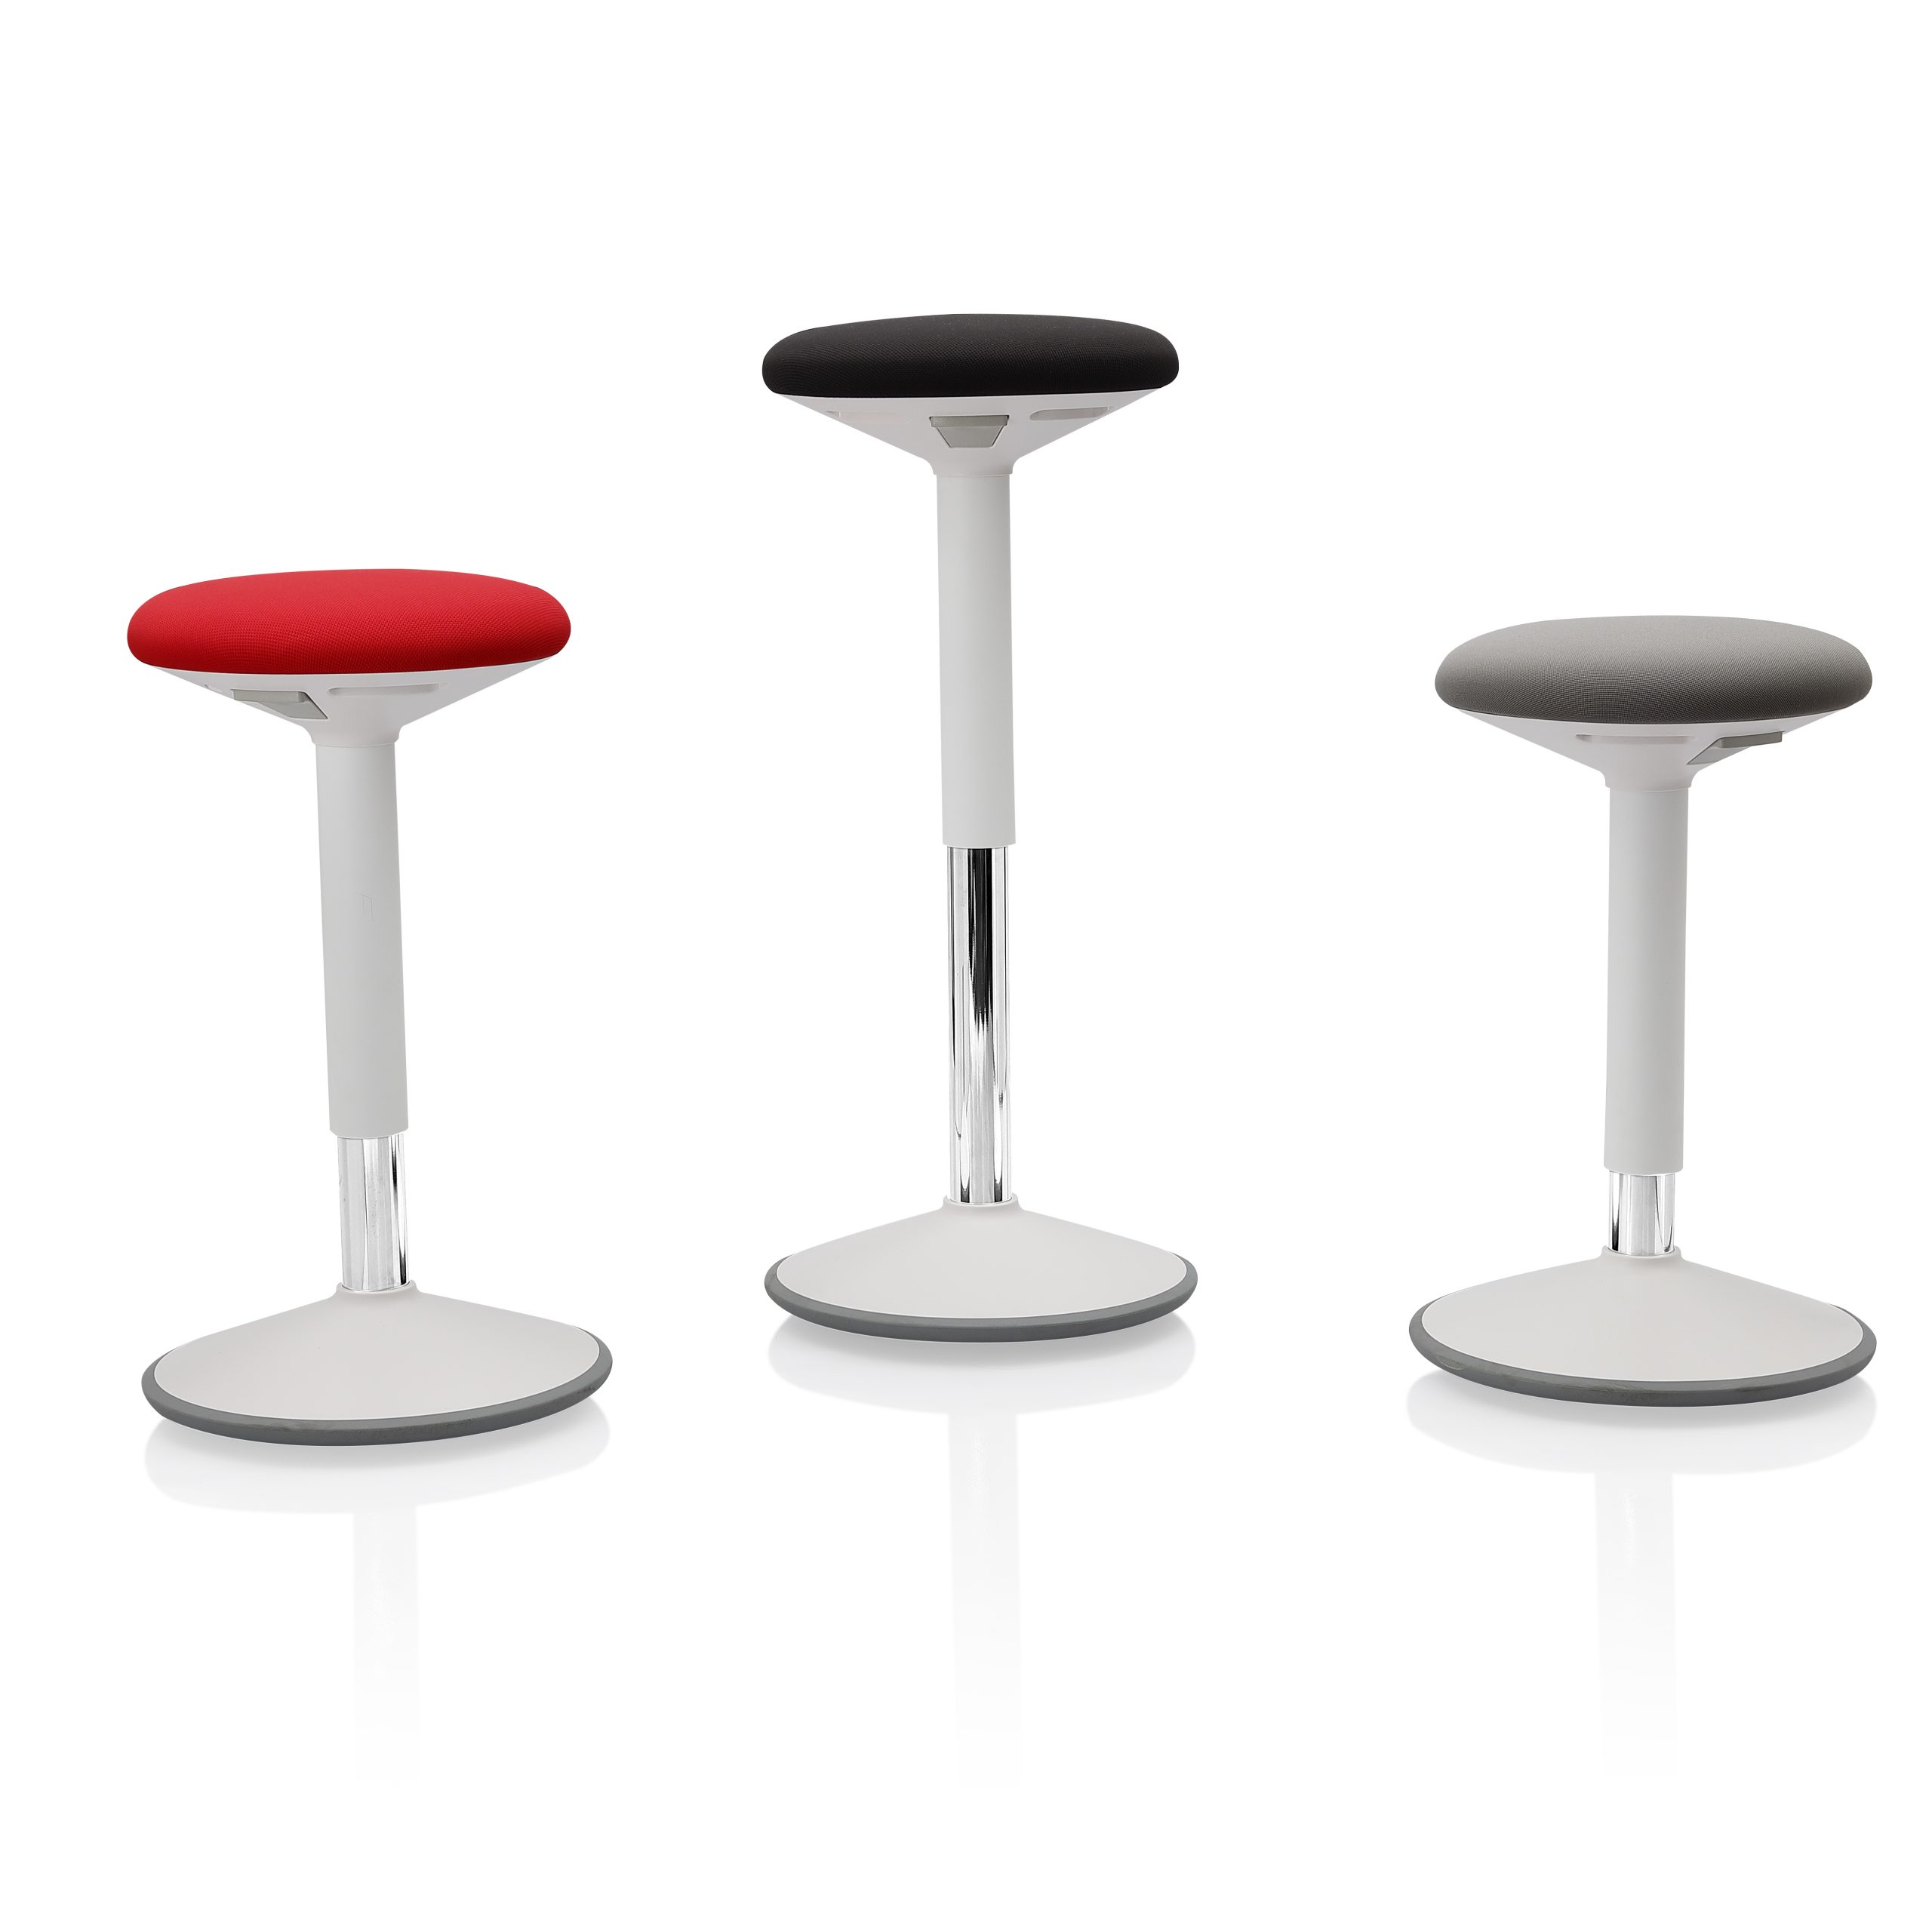 Office Chairs Dubai | Wobble Stool By Navodesk, Ergonomic Stool, Active Chair